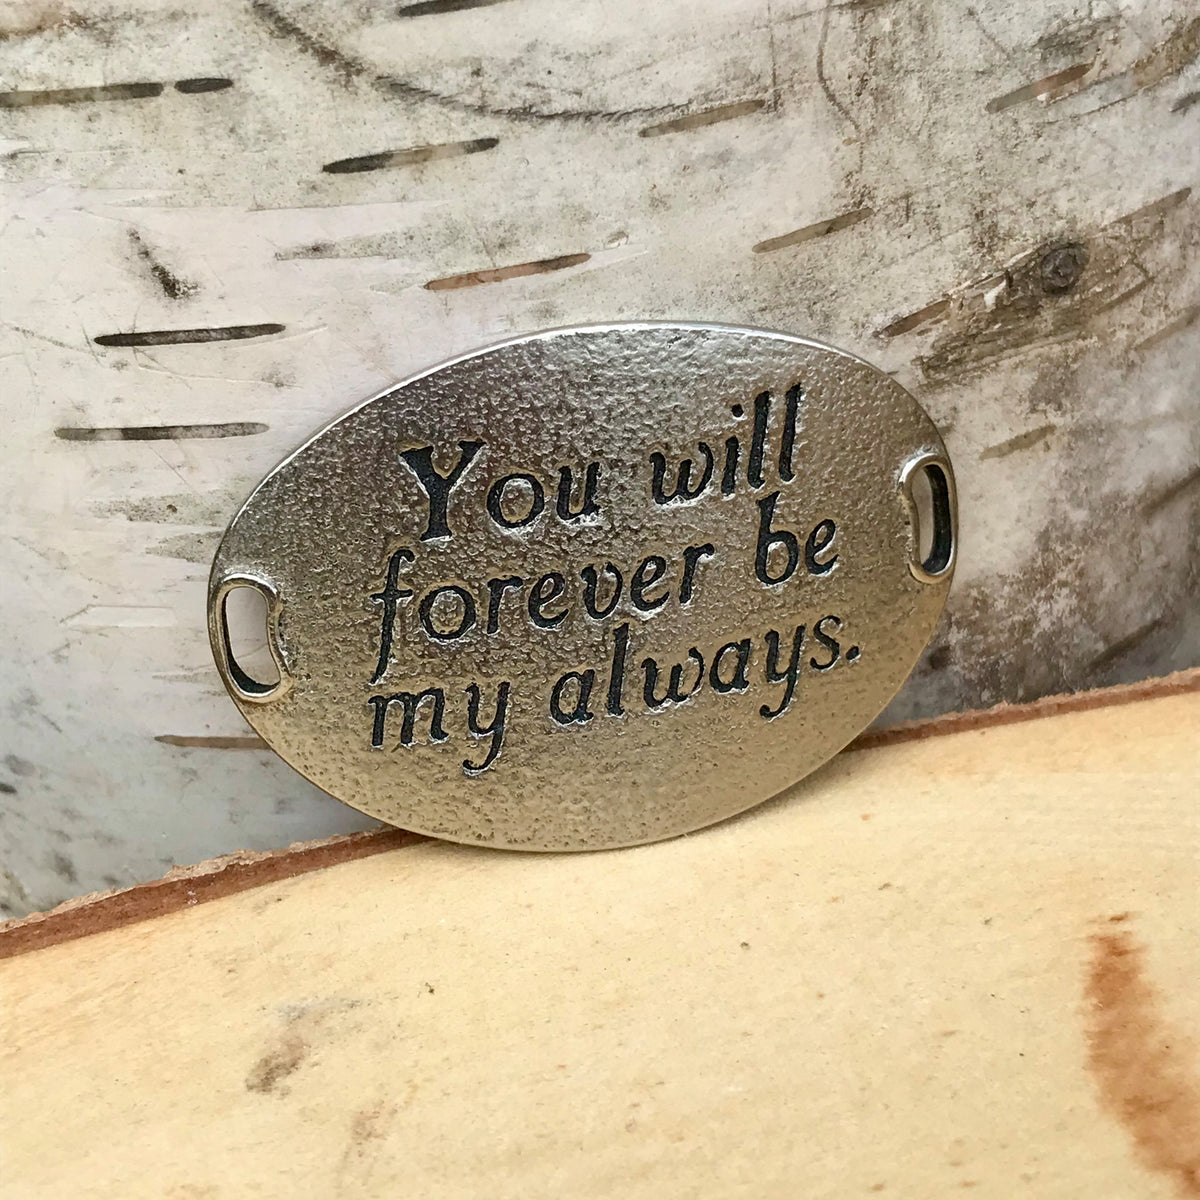 Silver oval Lenny & Eva bracelet sentiment that reads, "You will forever be my always."